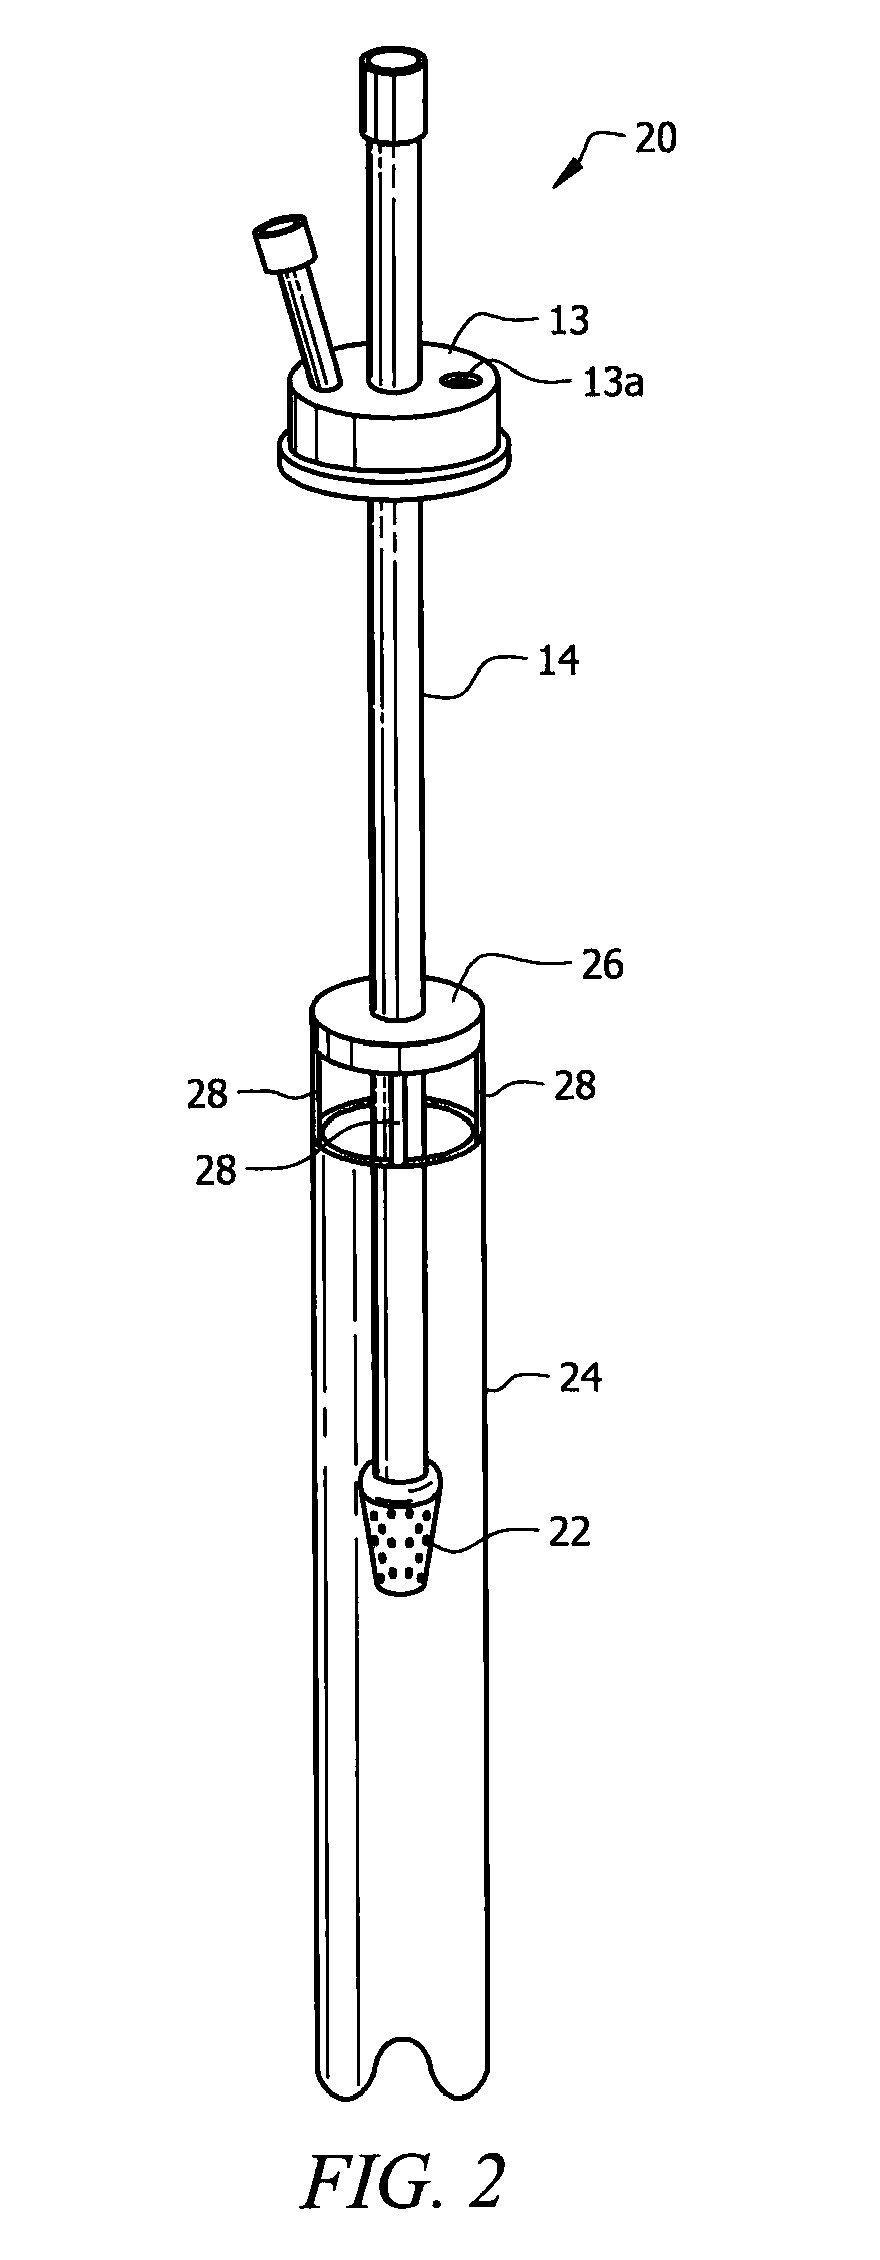 Toroidal convection mixing device